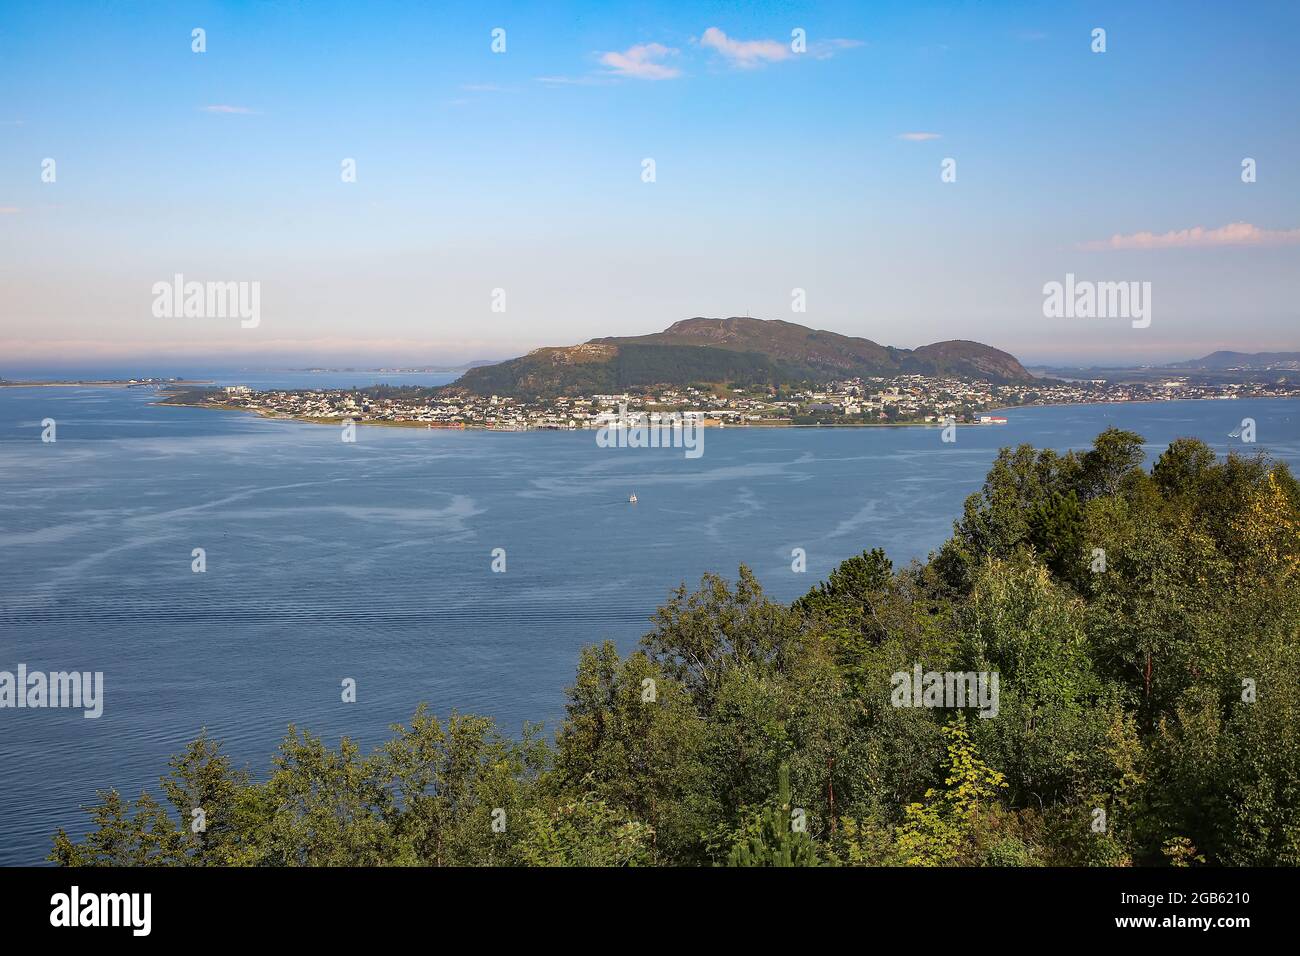 View of the beautiful landscape of the archipelago, islands and fjords from the viewpoint Aksla, Alesund, Norway. Stock Photo